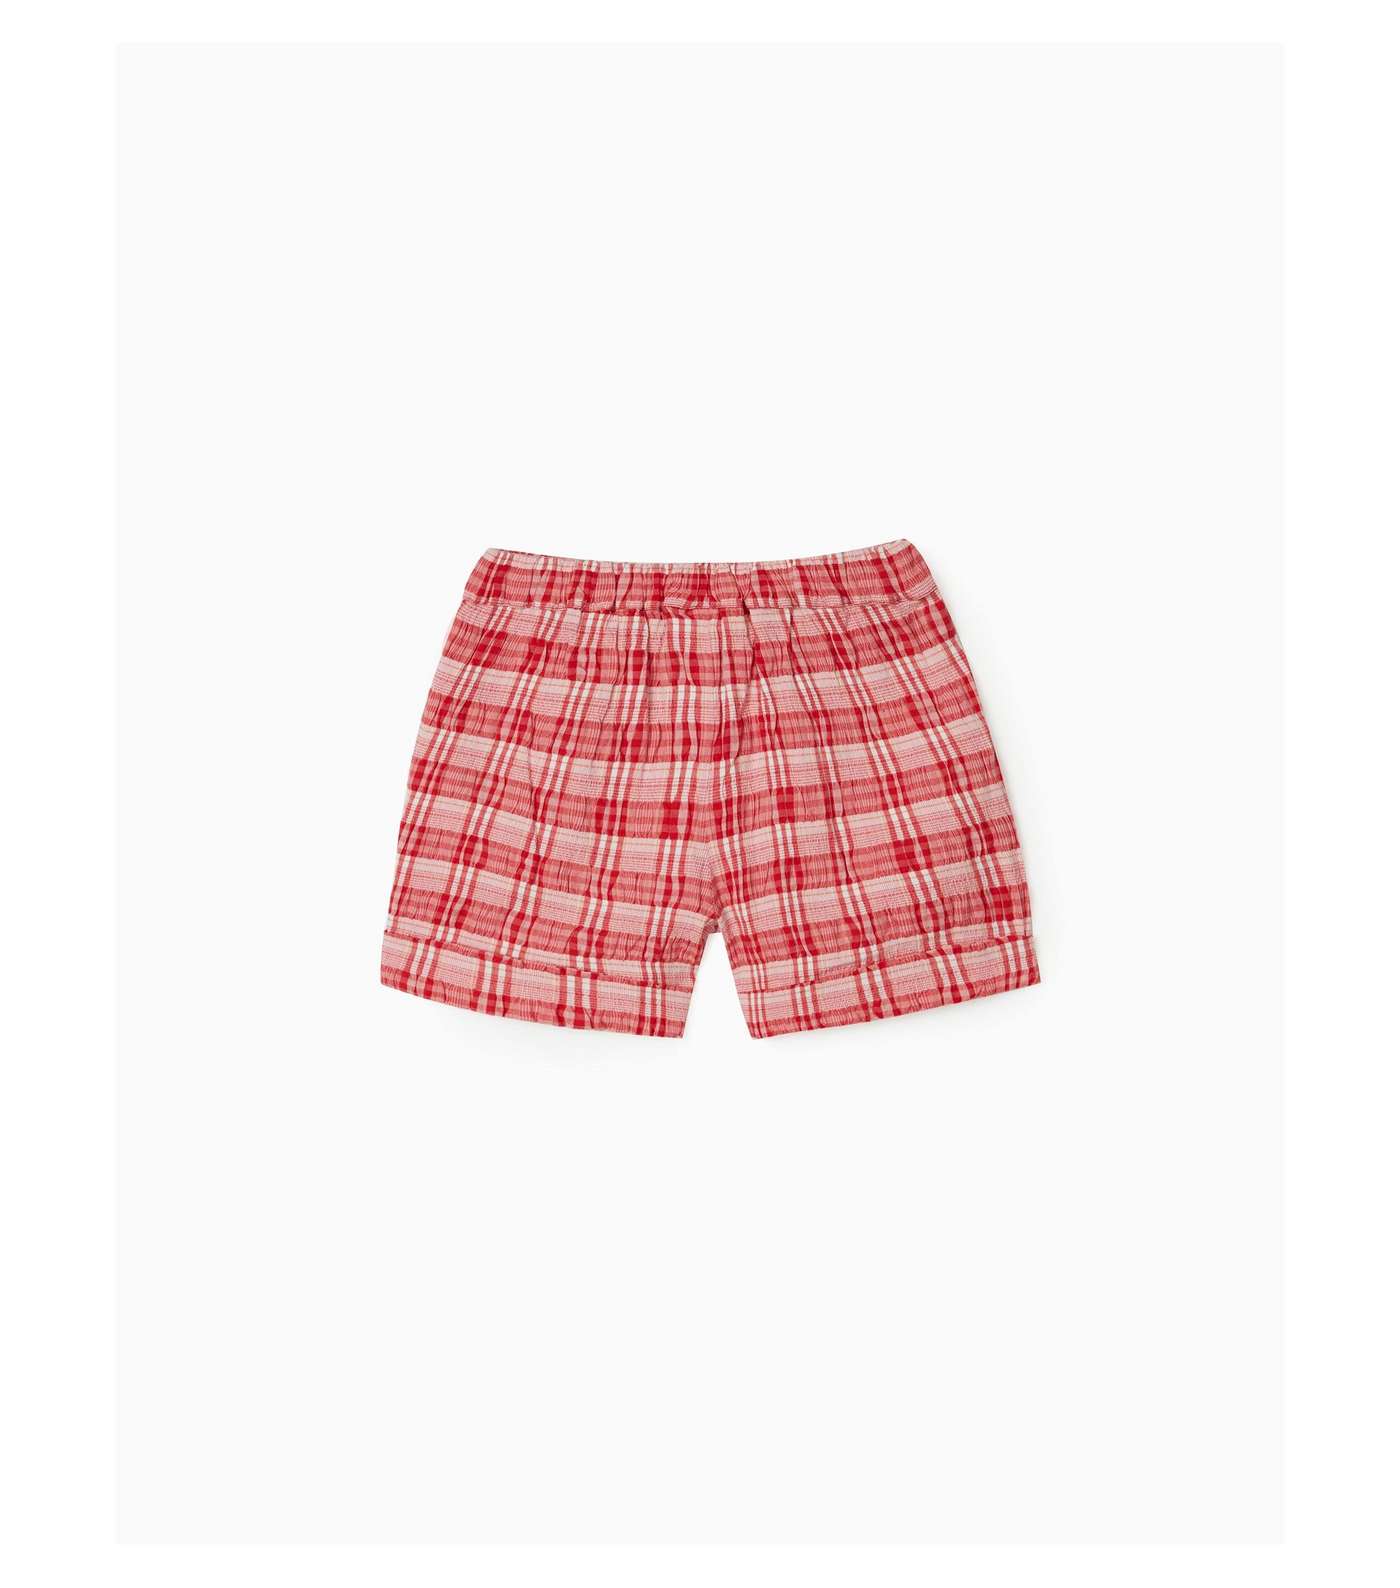 Zippy Red Check Textured Shorts Image 2